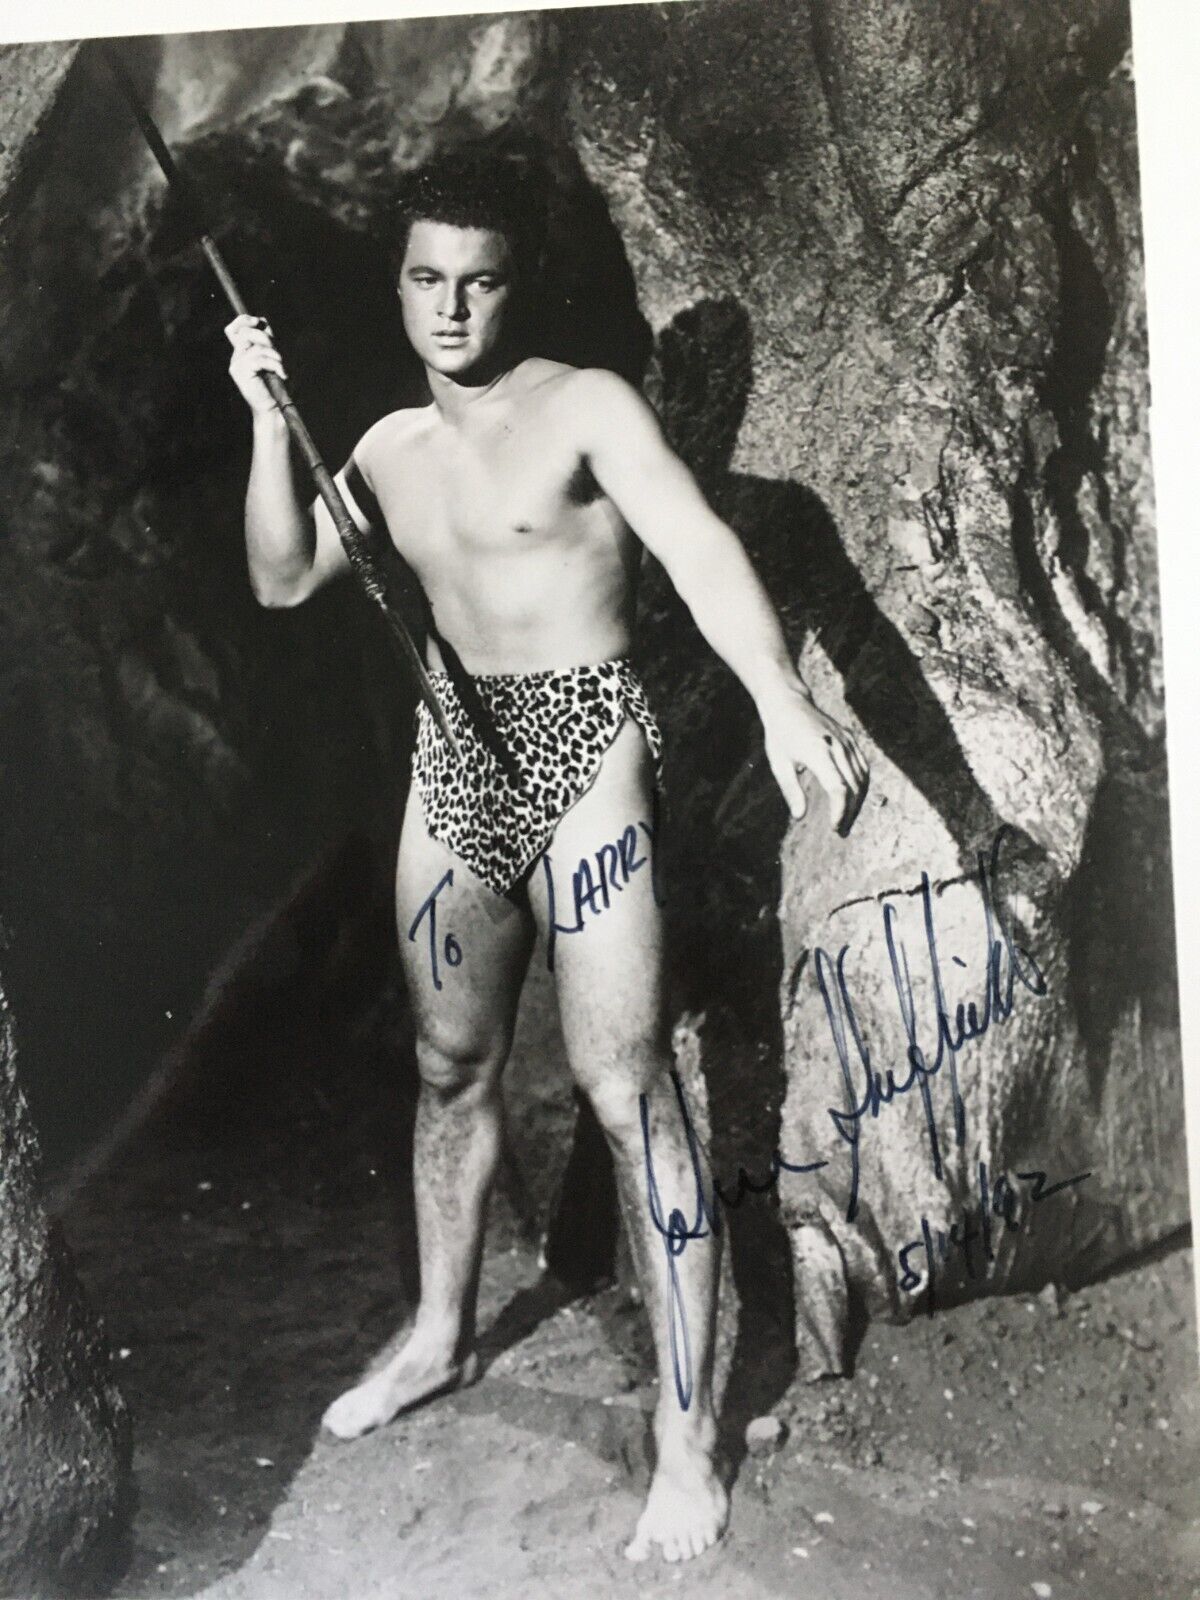 Johnny Sheffield as Bomba The Jungle Boy signed and inscribed 8x10 glossy photo